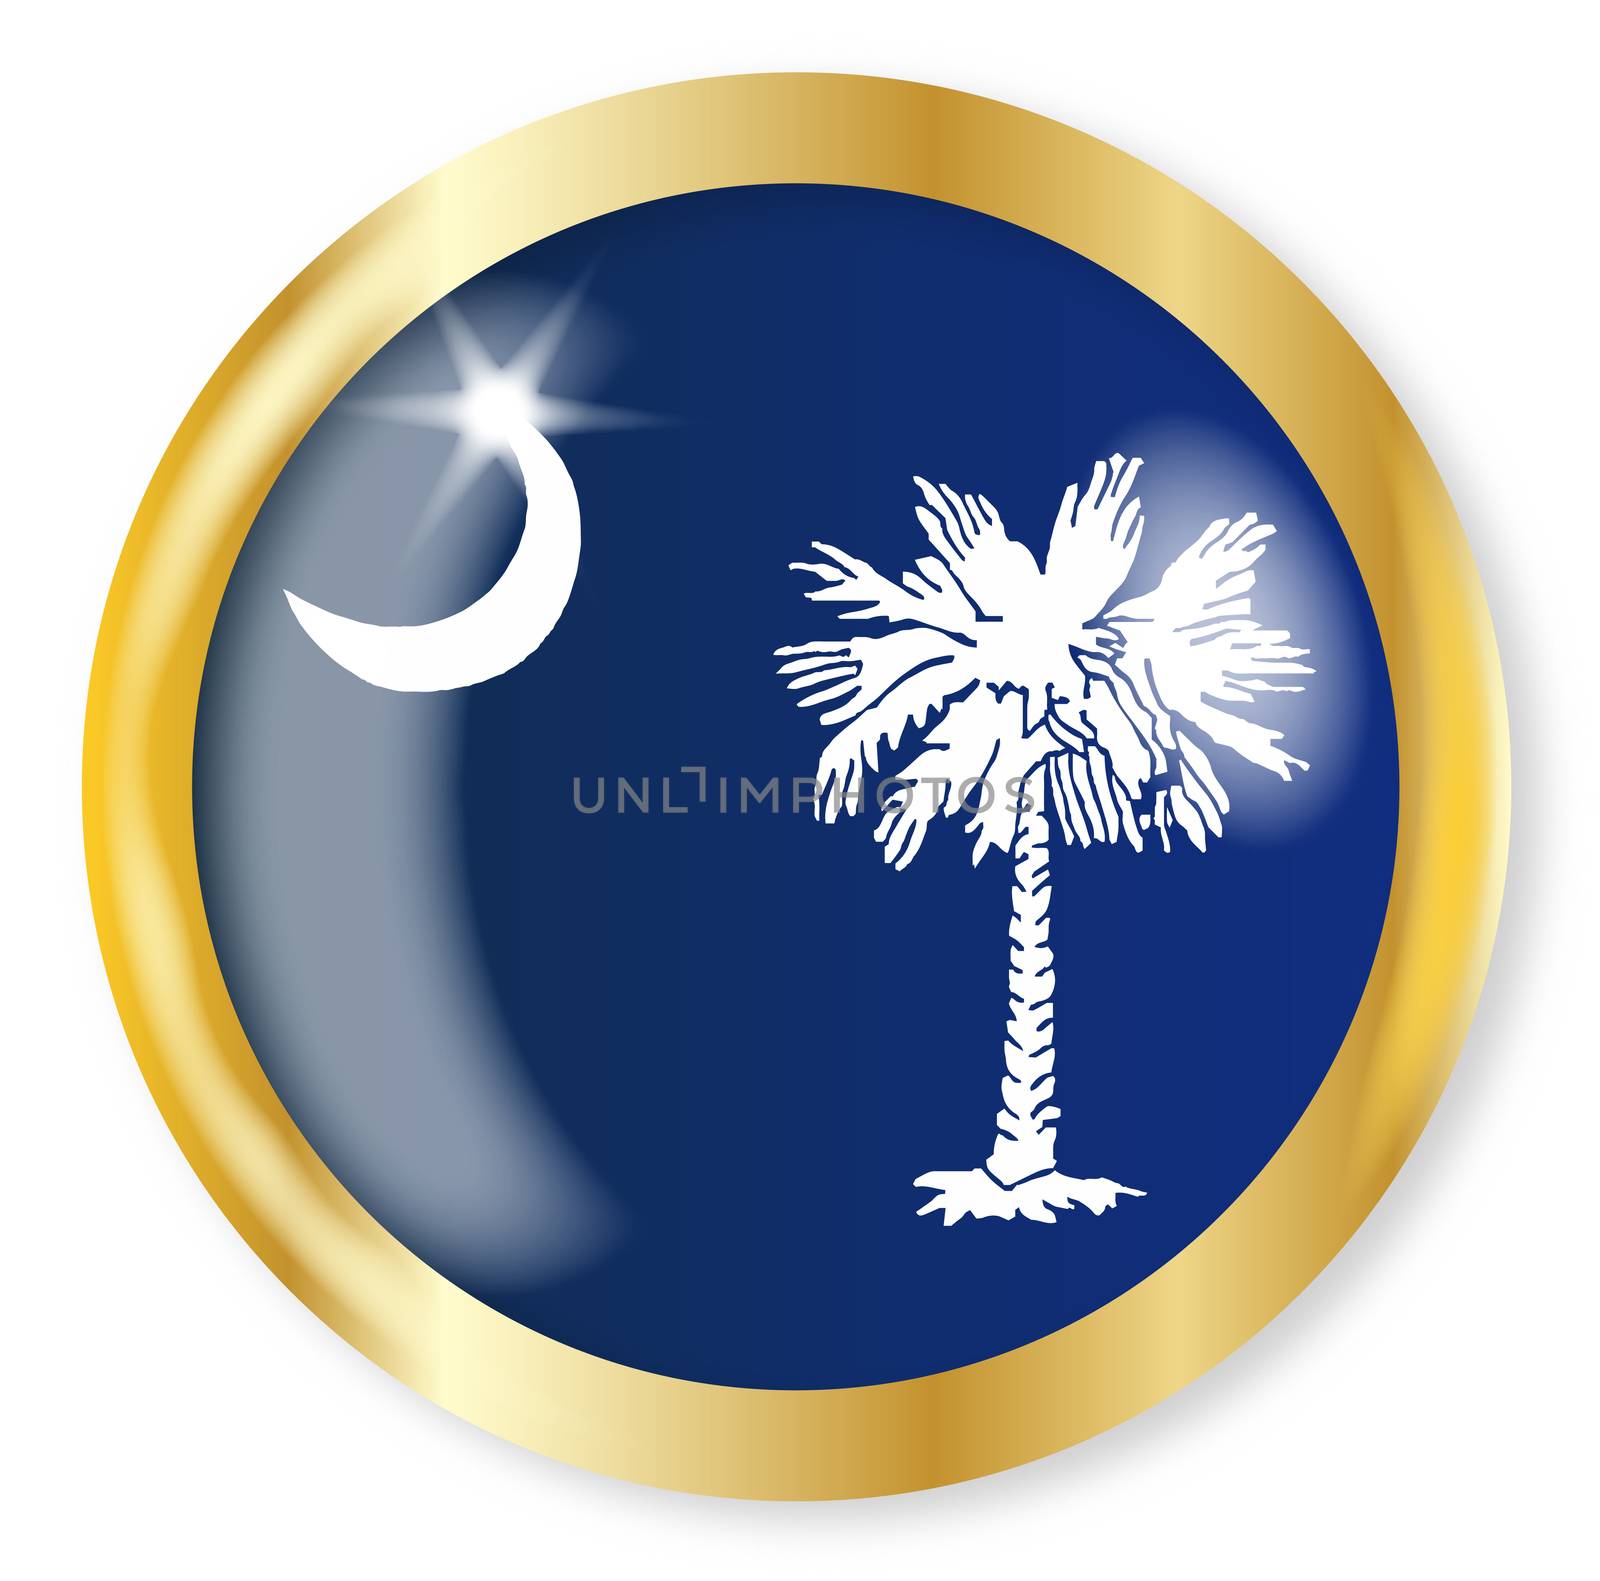 South Carolina state flag button with a gold metal circular border over a white background